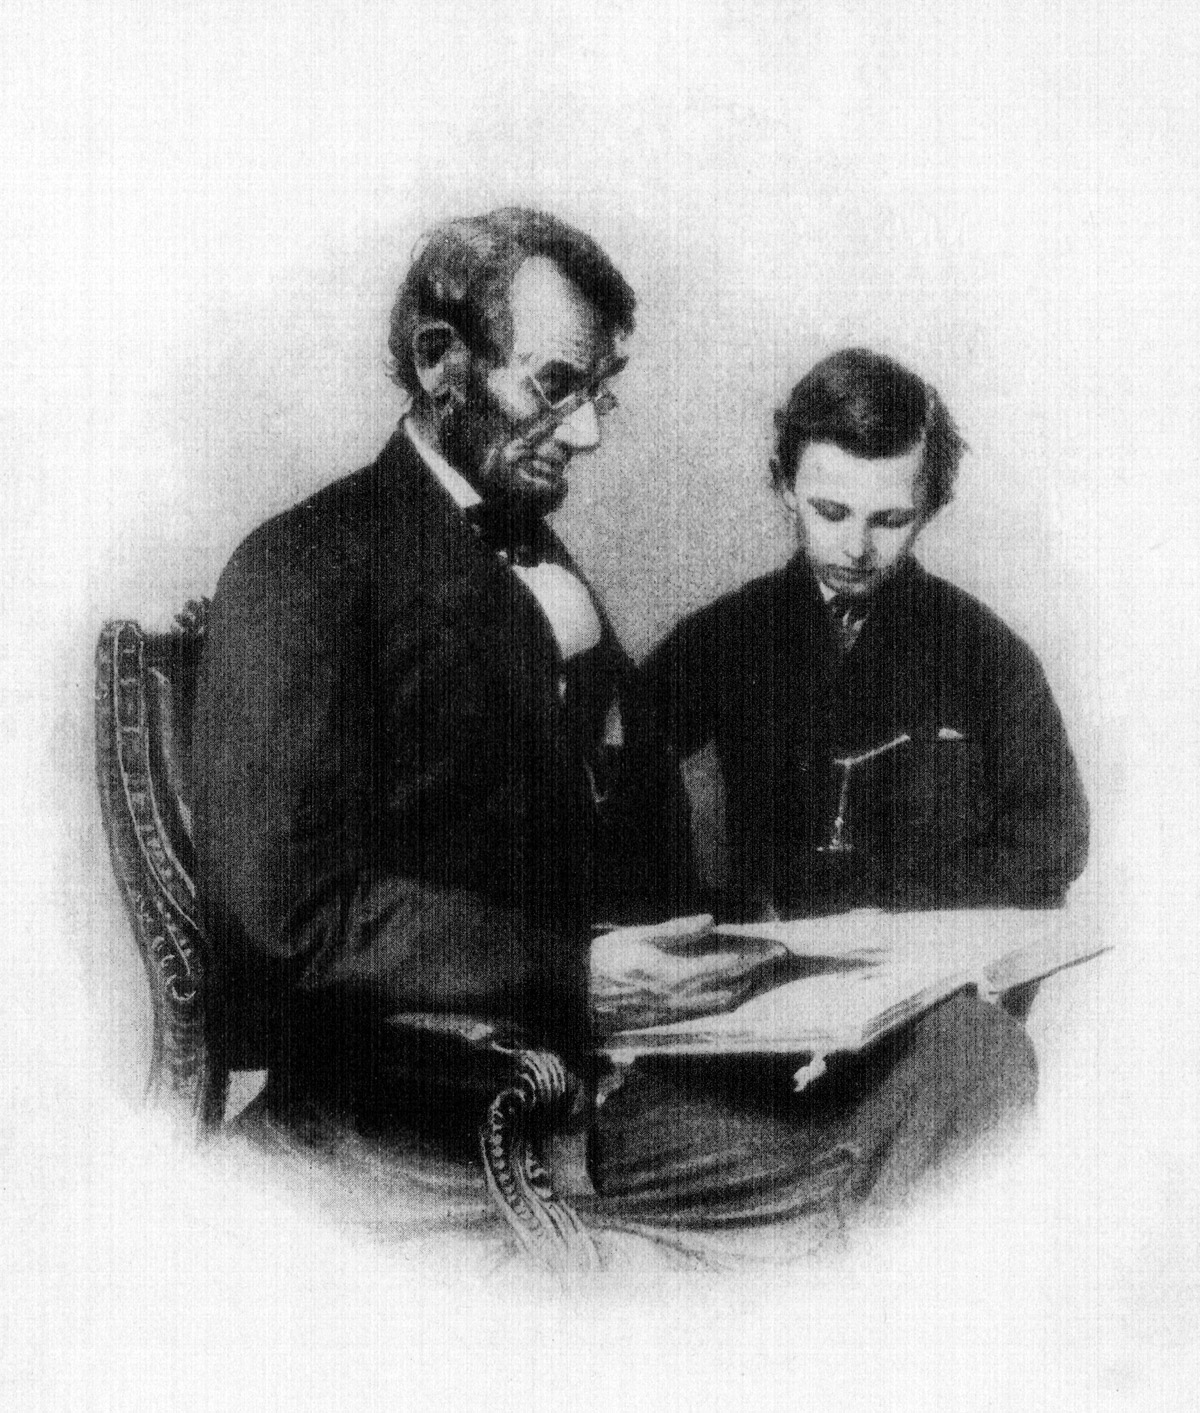 PRESIDENT LINCOLN AND HIS SON "TAD."